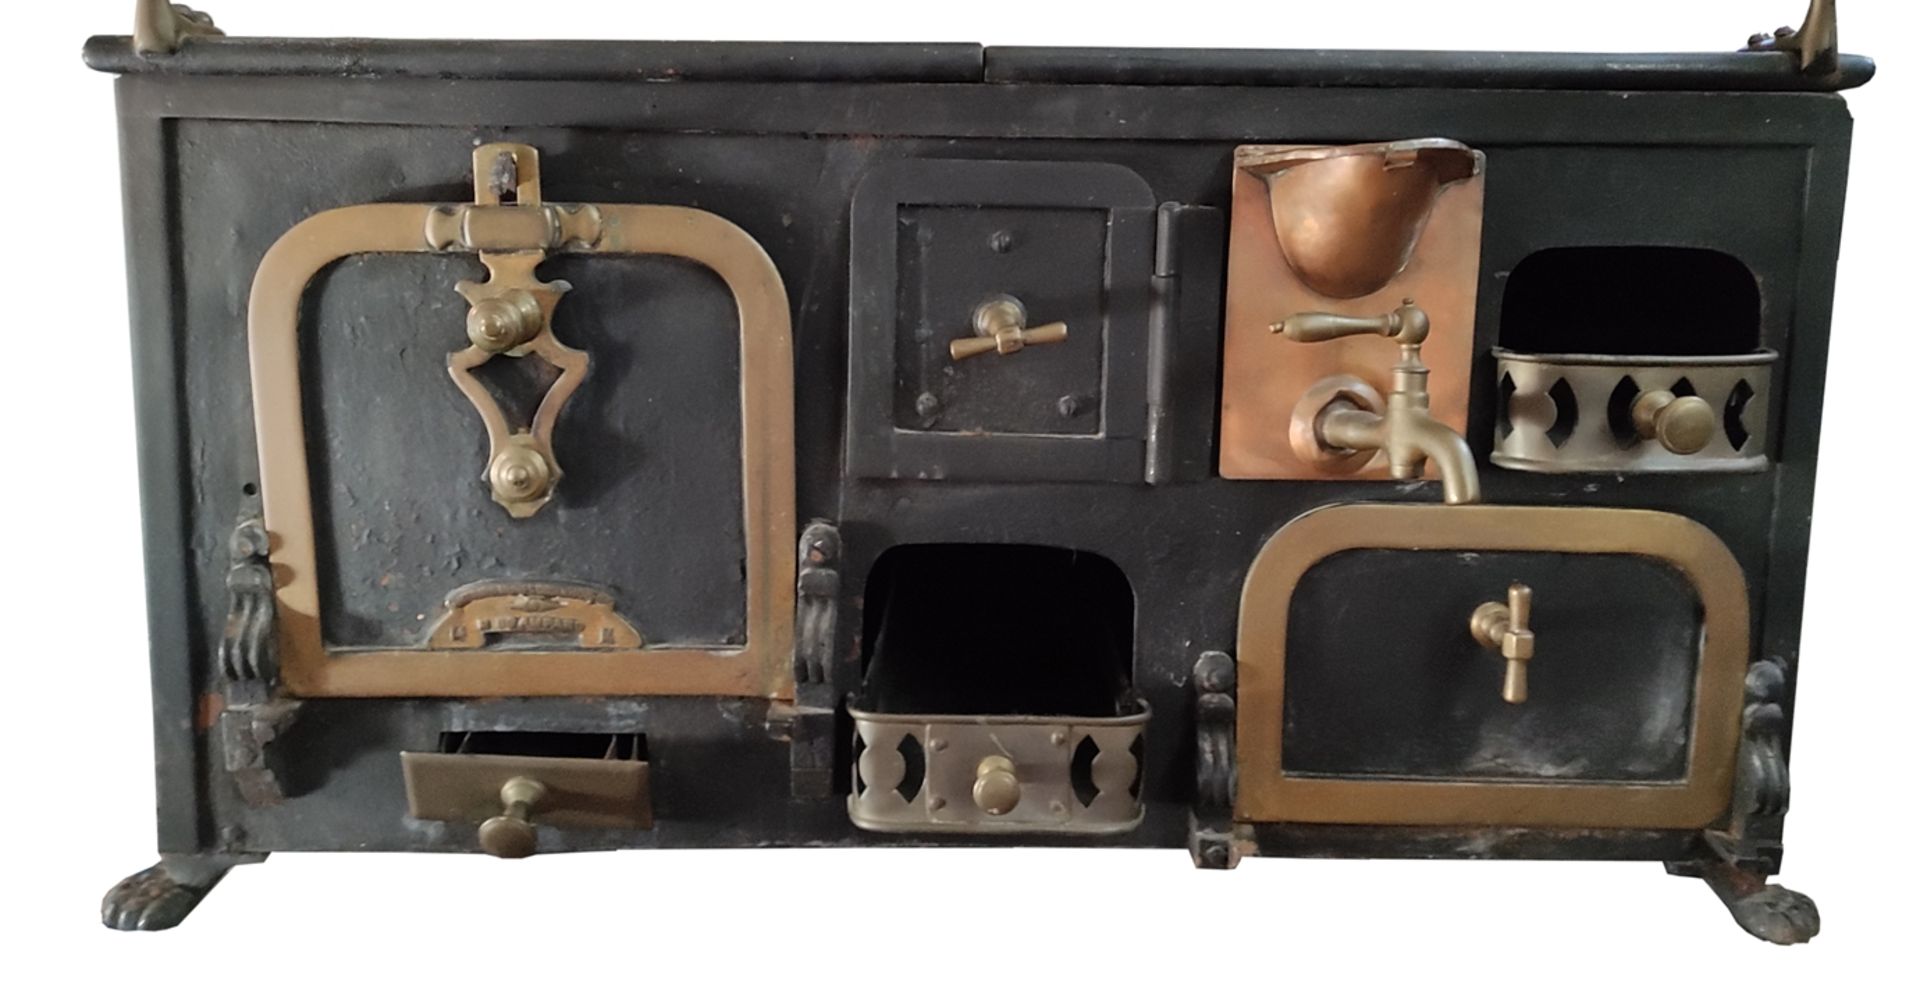 Antique children's play stove/oven, three hotplates, brass bar all around, underneath compartment f - Image 2 of 5